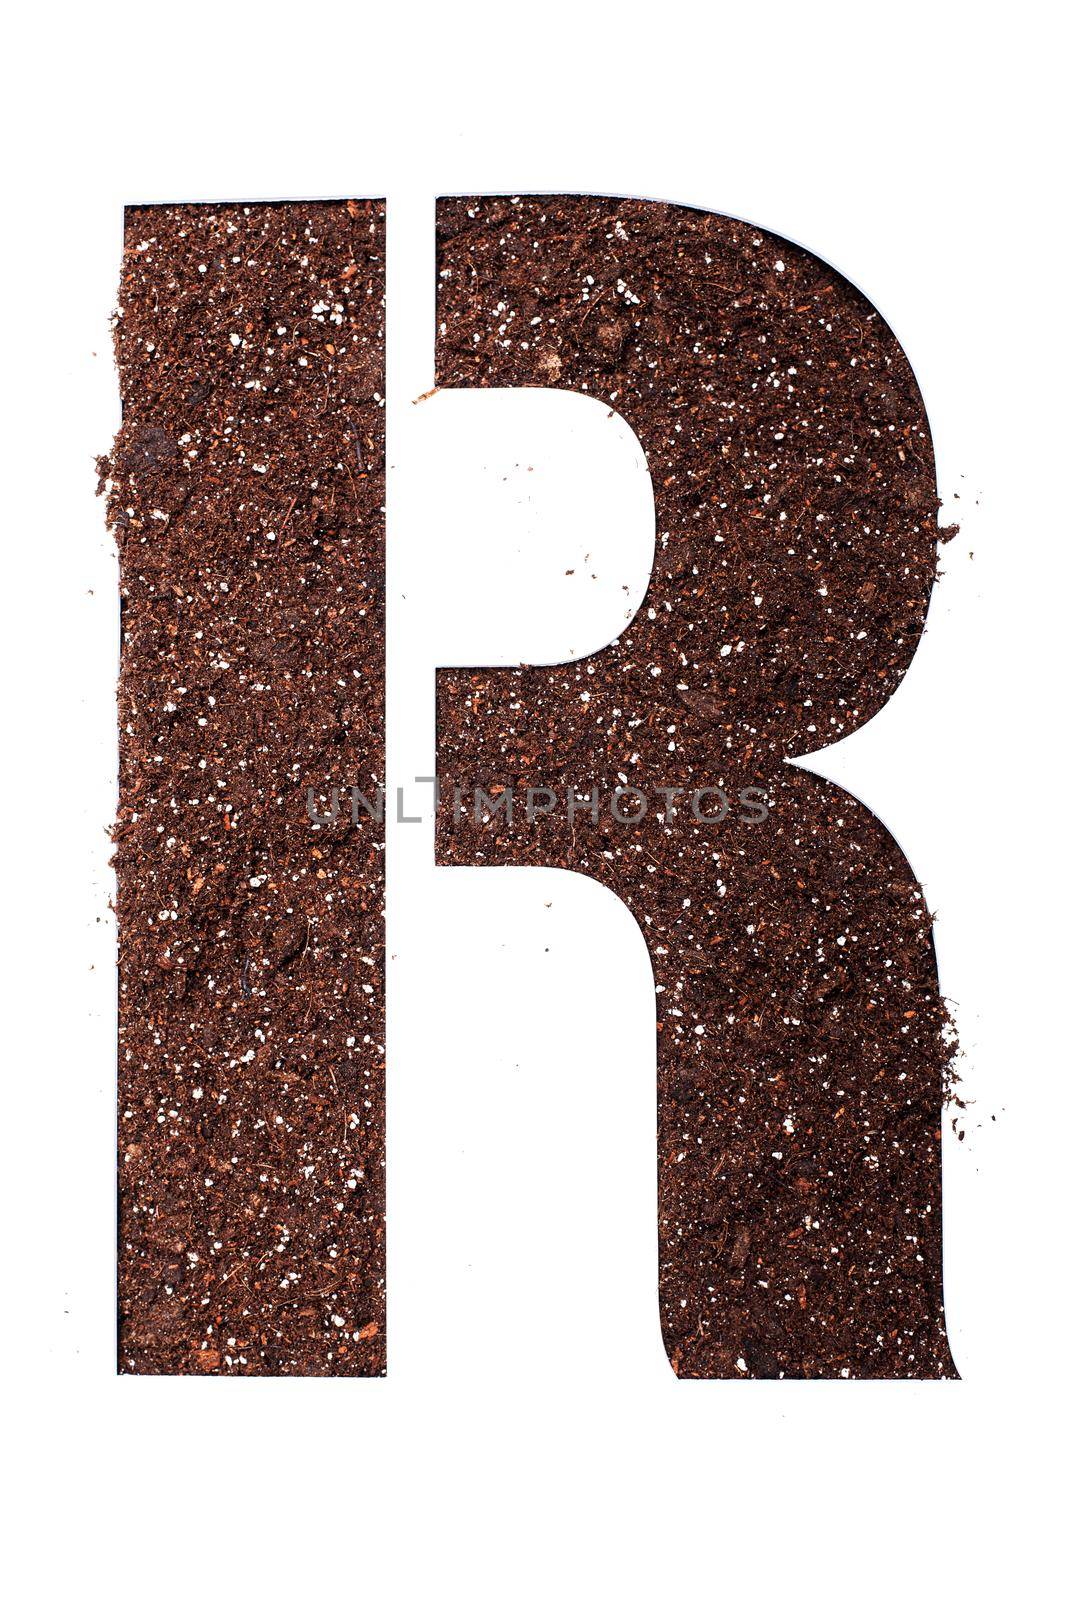 stencil letter R made above dirt on white surface